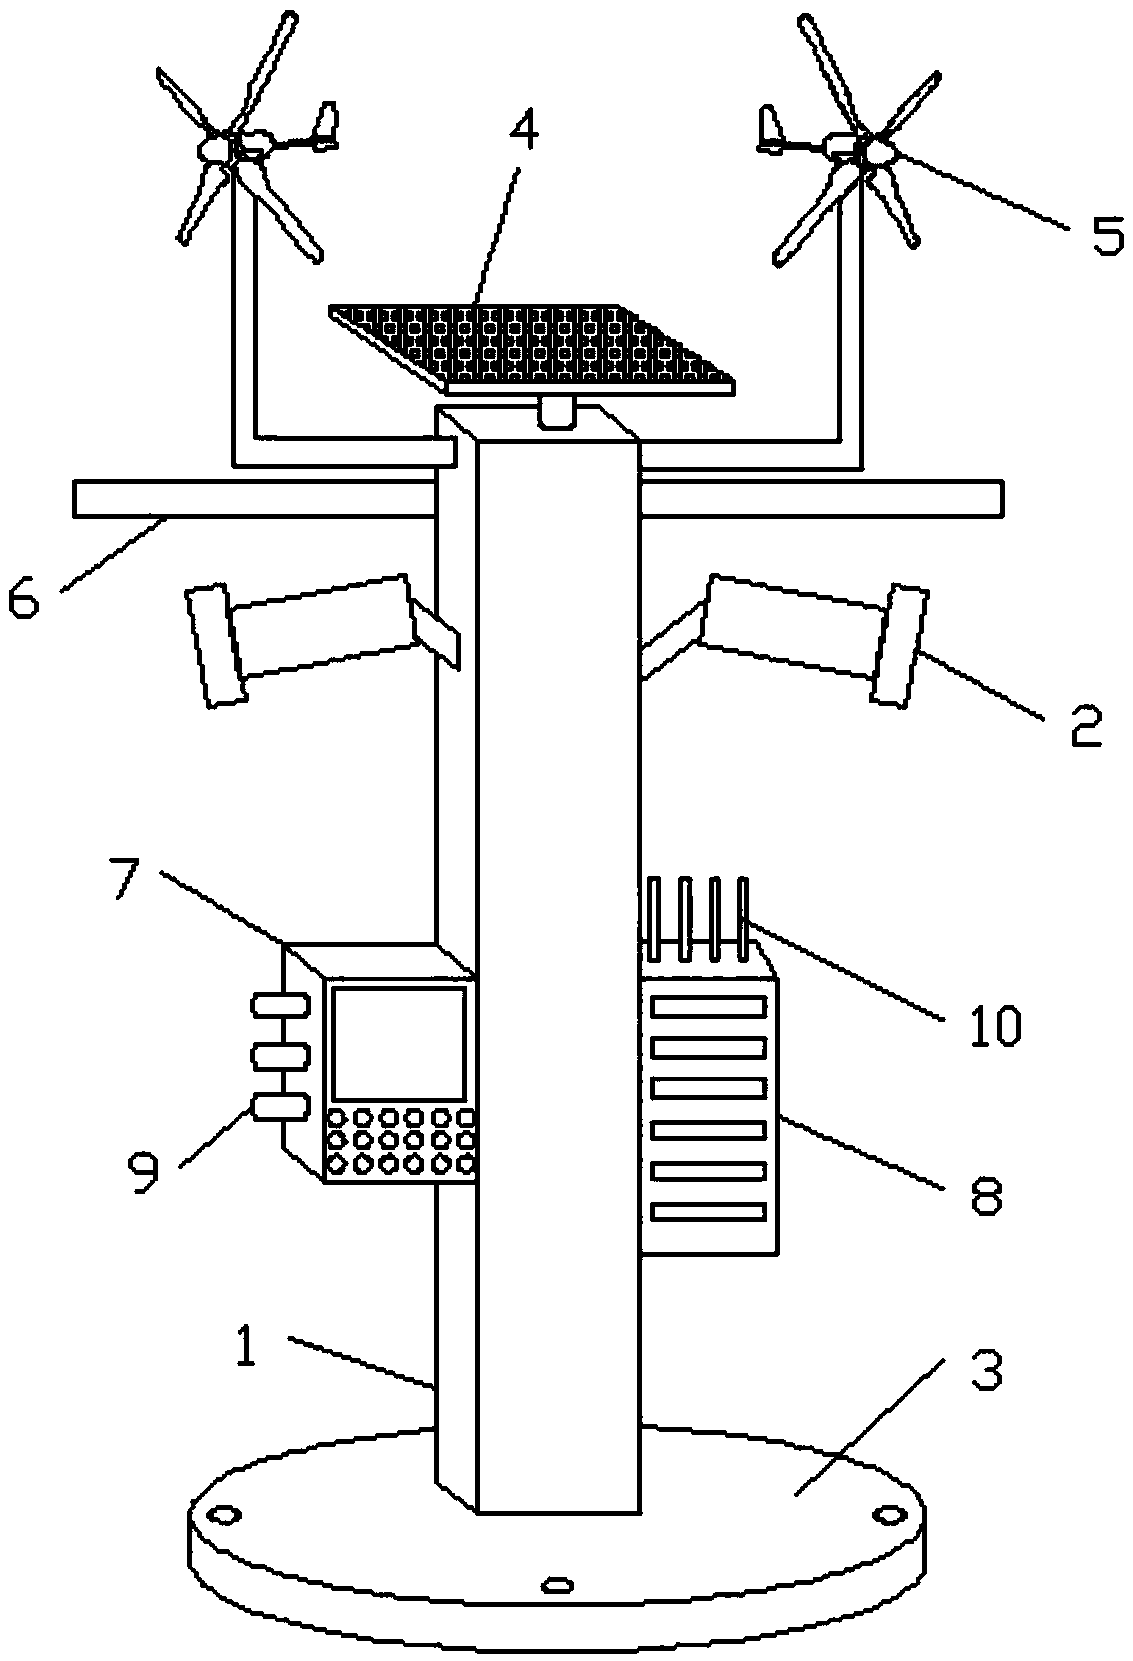 Safety monitoring device capable of being remotely connected